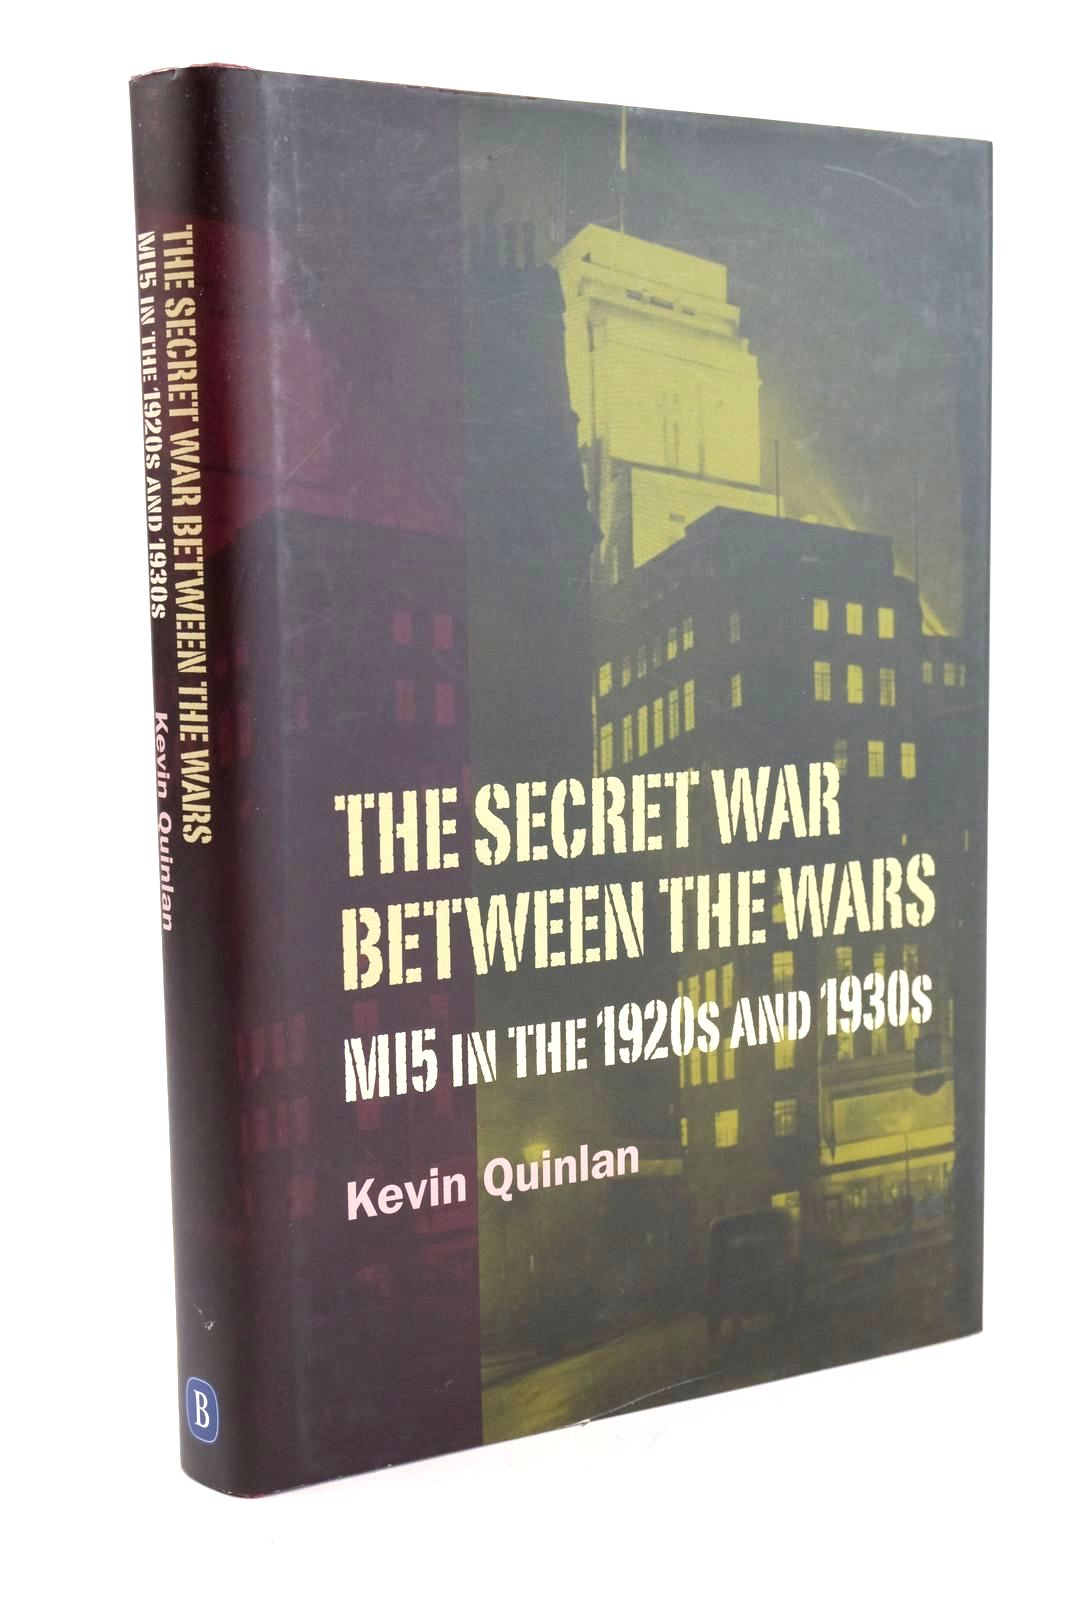 Photo of THE SECRET WAR BETWEEN THE WARS MI5 IN THE 1920S AND 1930S written by Quinlan, Kevin published by The Boydell Press (STOCK CODE: 1325192)  for sale by Stella & Rose's Books